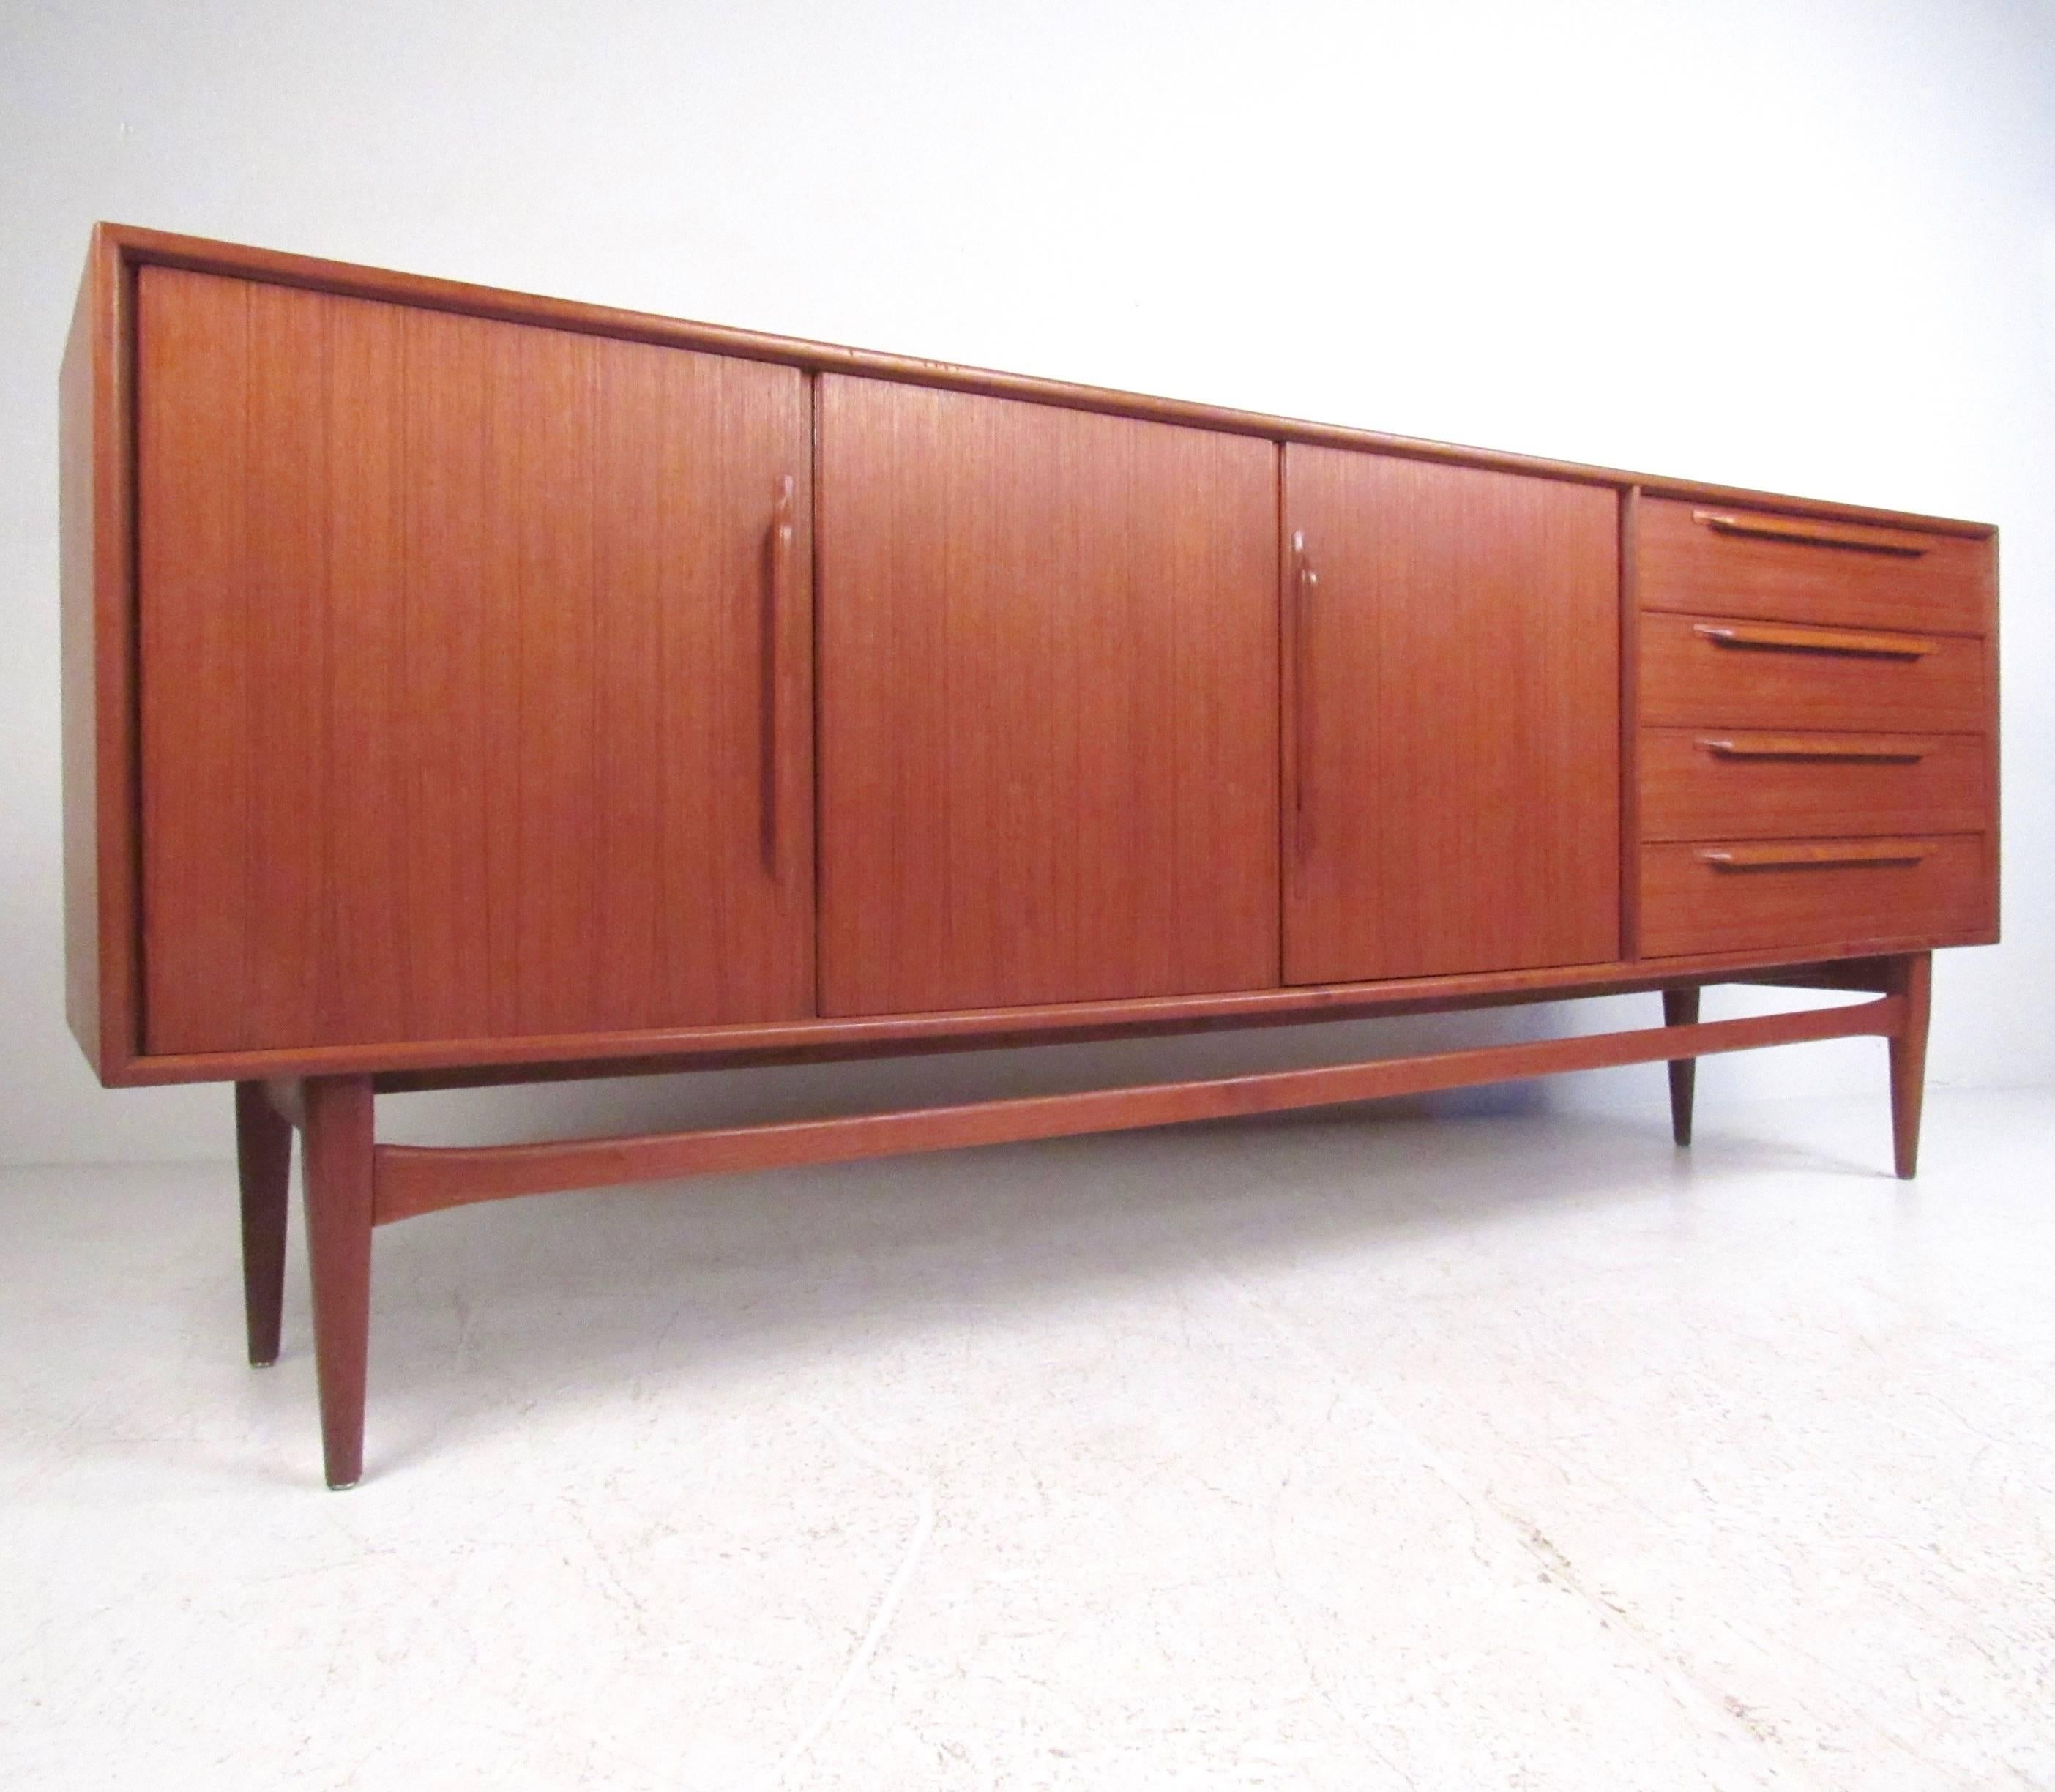 This exquisite vintage teak sideboard features elegant sculpted pulls, tapered legs and shapely leg stretcher for addition support. Spacious interior cabinet offers adjustable shelf storage, while four hardwood drawers make it easy to organize in